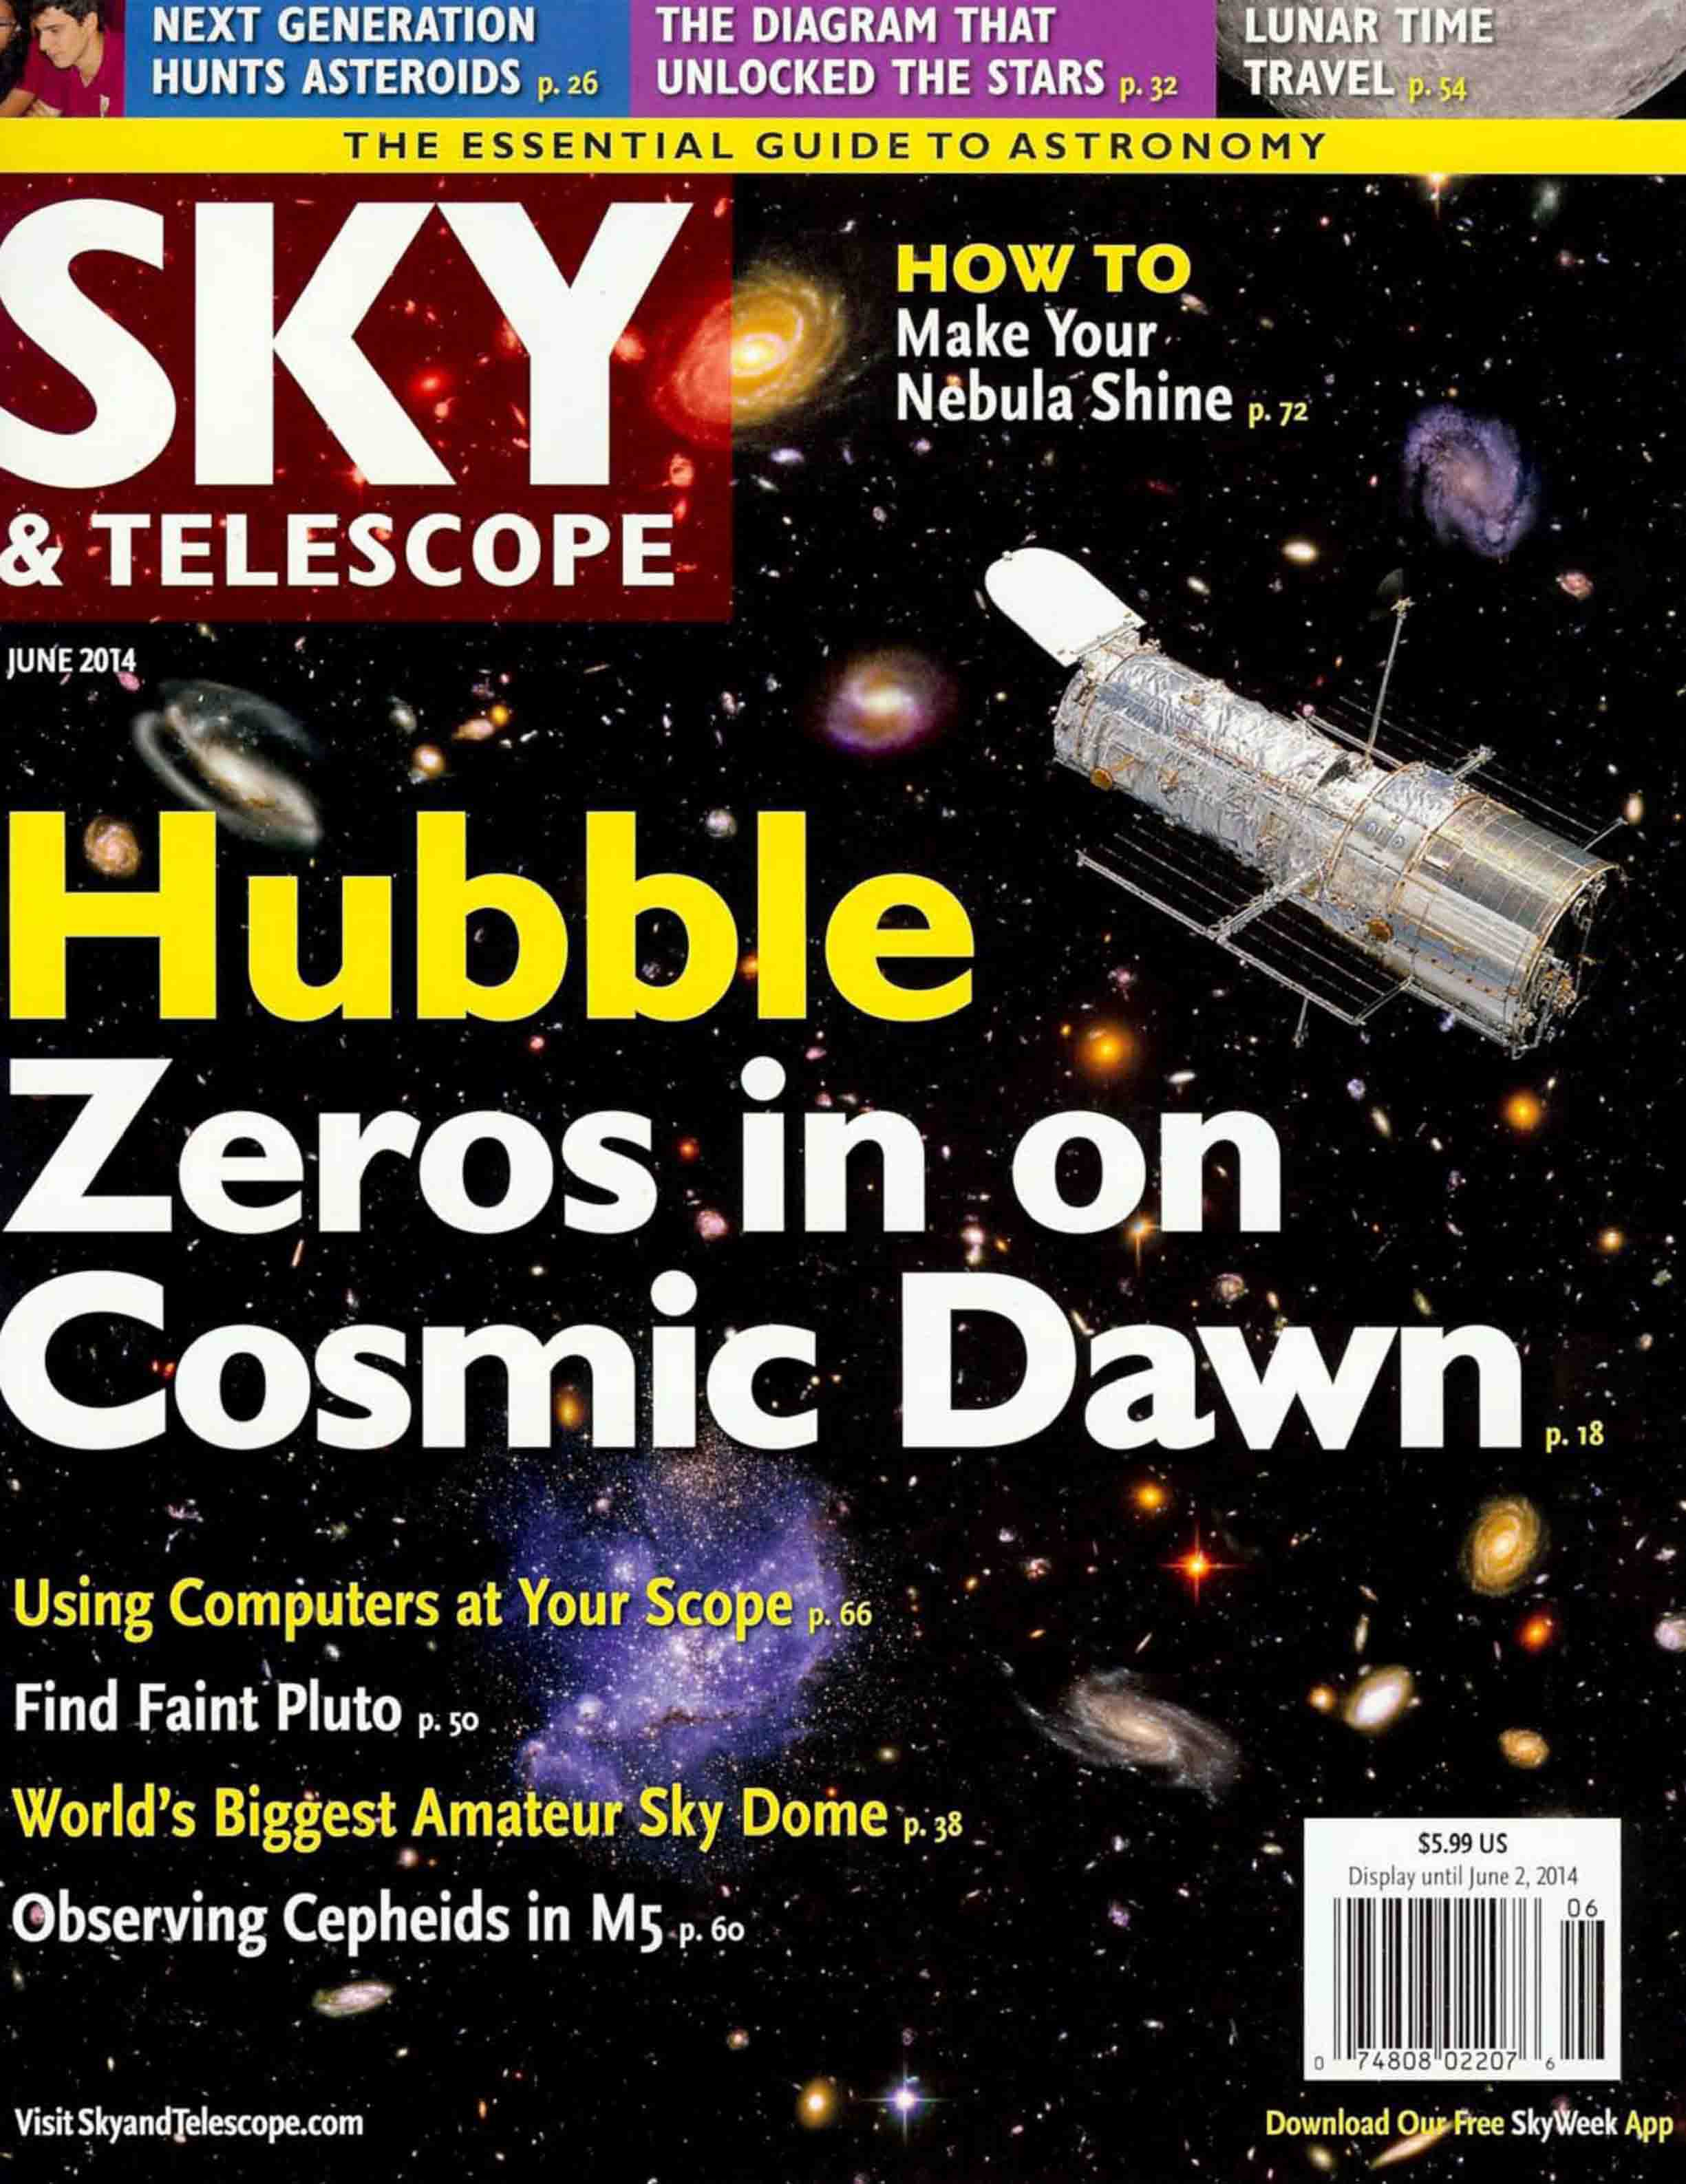 “Staring Back to Cosmic Dawn,” cover story about CANDELS; wrote with Sandra M. Faber, Henry C. Ferguson, David C. Koo, and Joel R. Primack. Sky & Telescope, June 2014